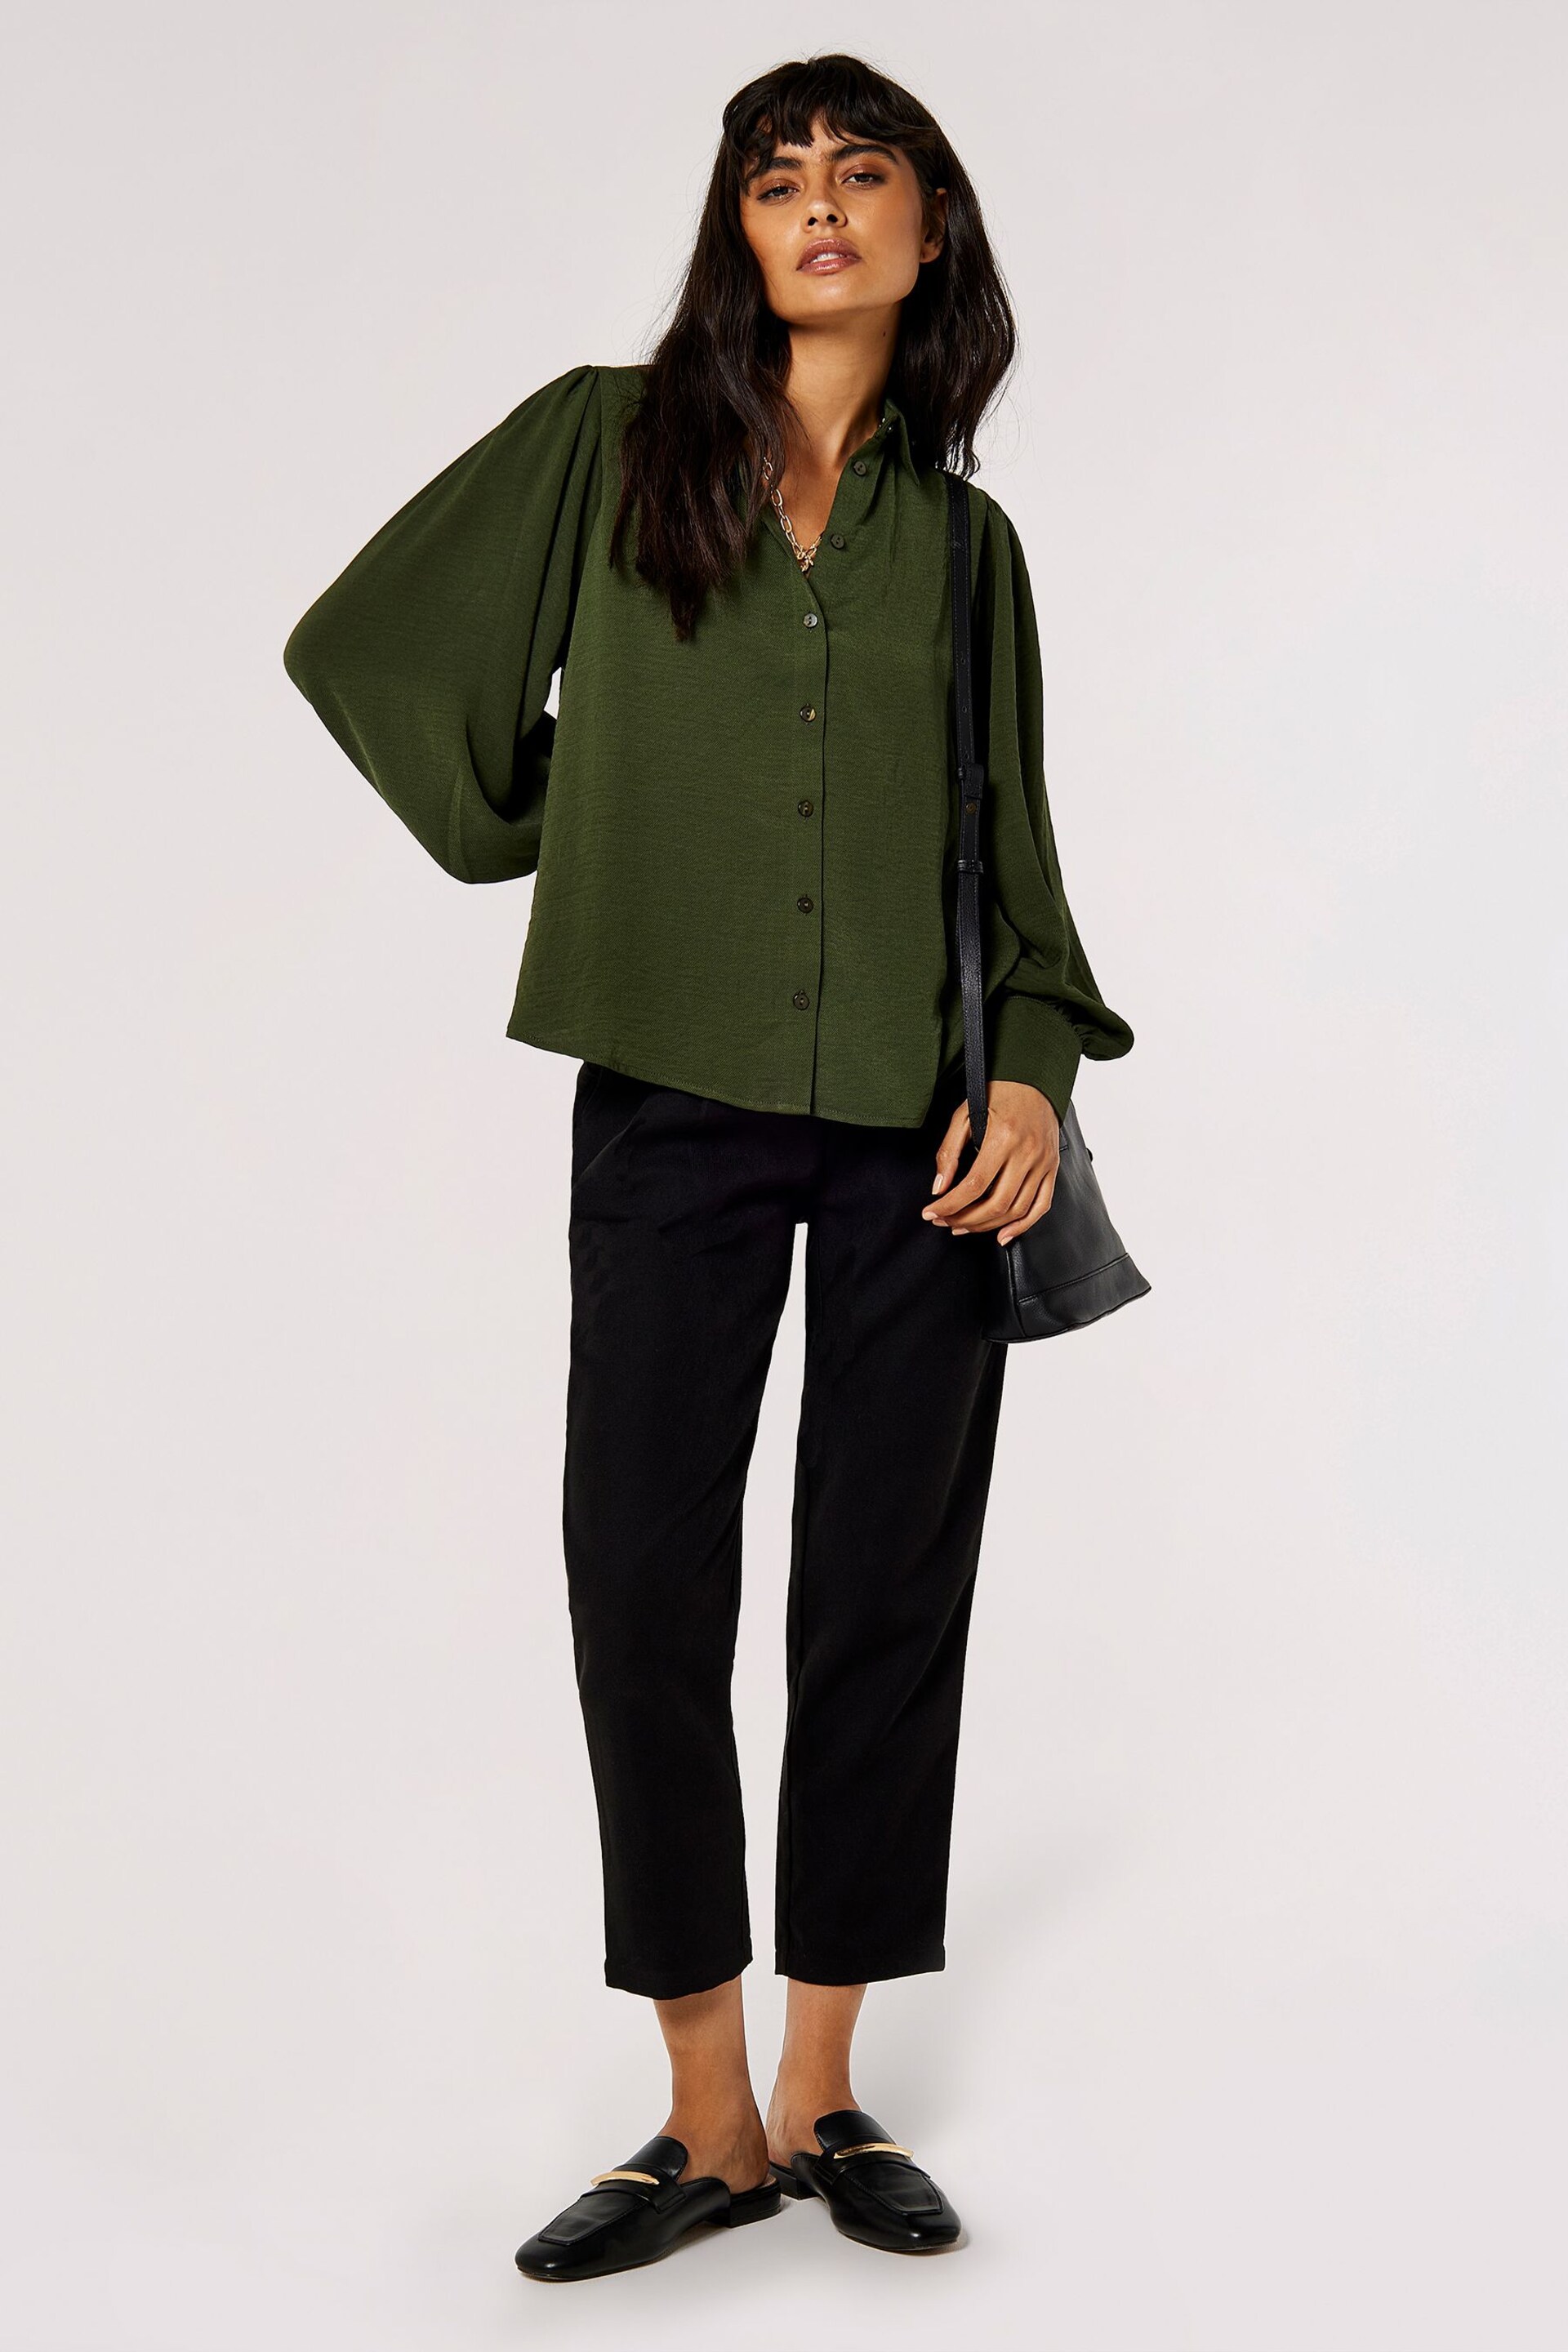 Apricot Green Airflow Volume Sleeve Shirt - Image 4 of 5